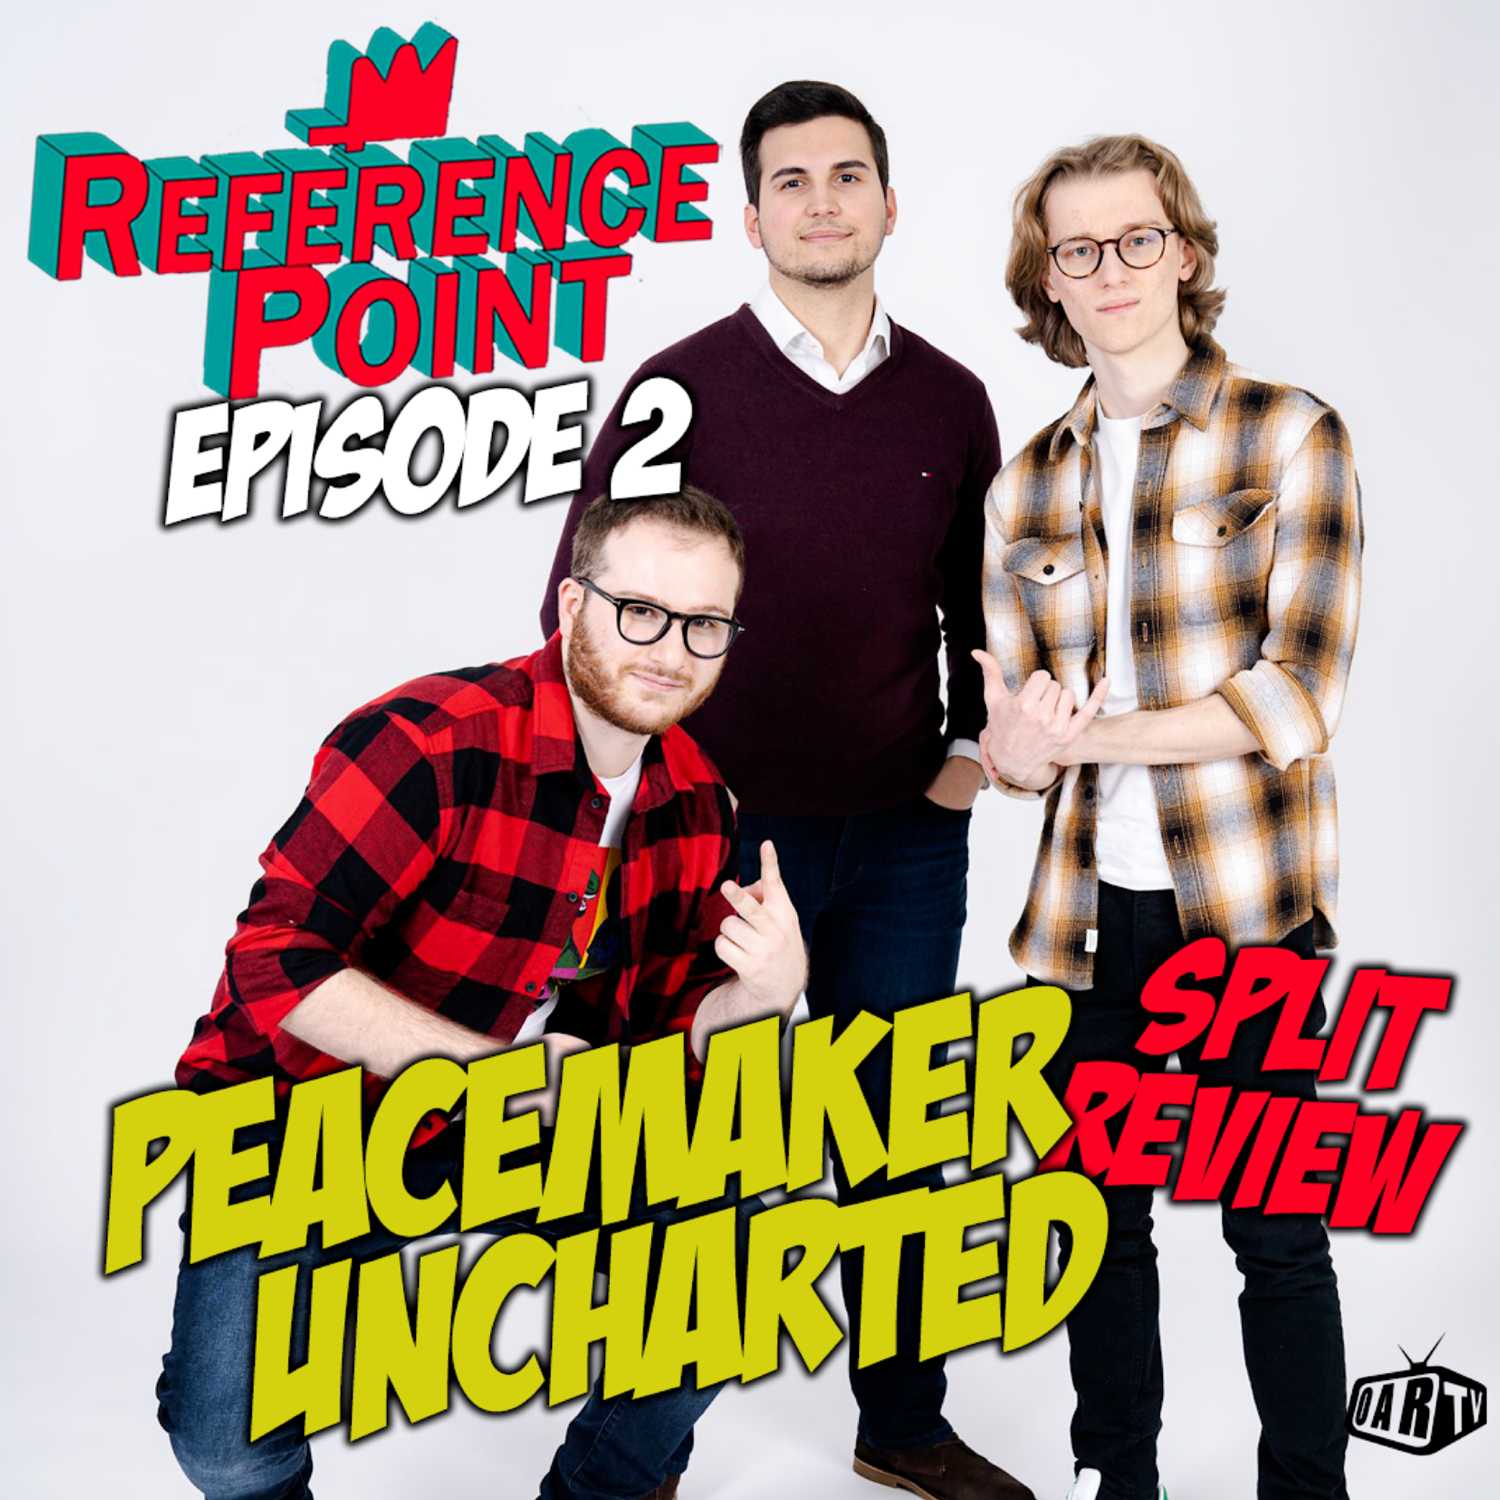 REFERENCE POINT - Episode 2 - Uncharted and Peacemaker